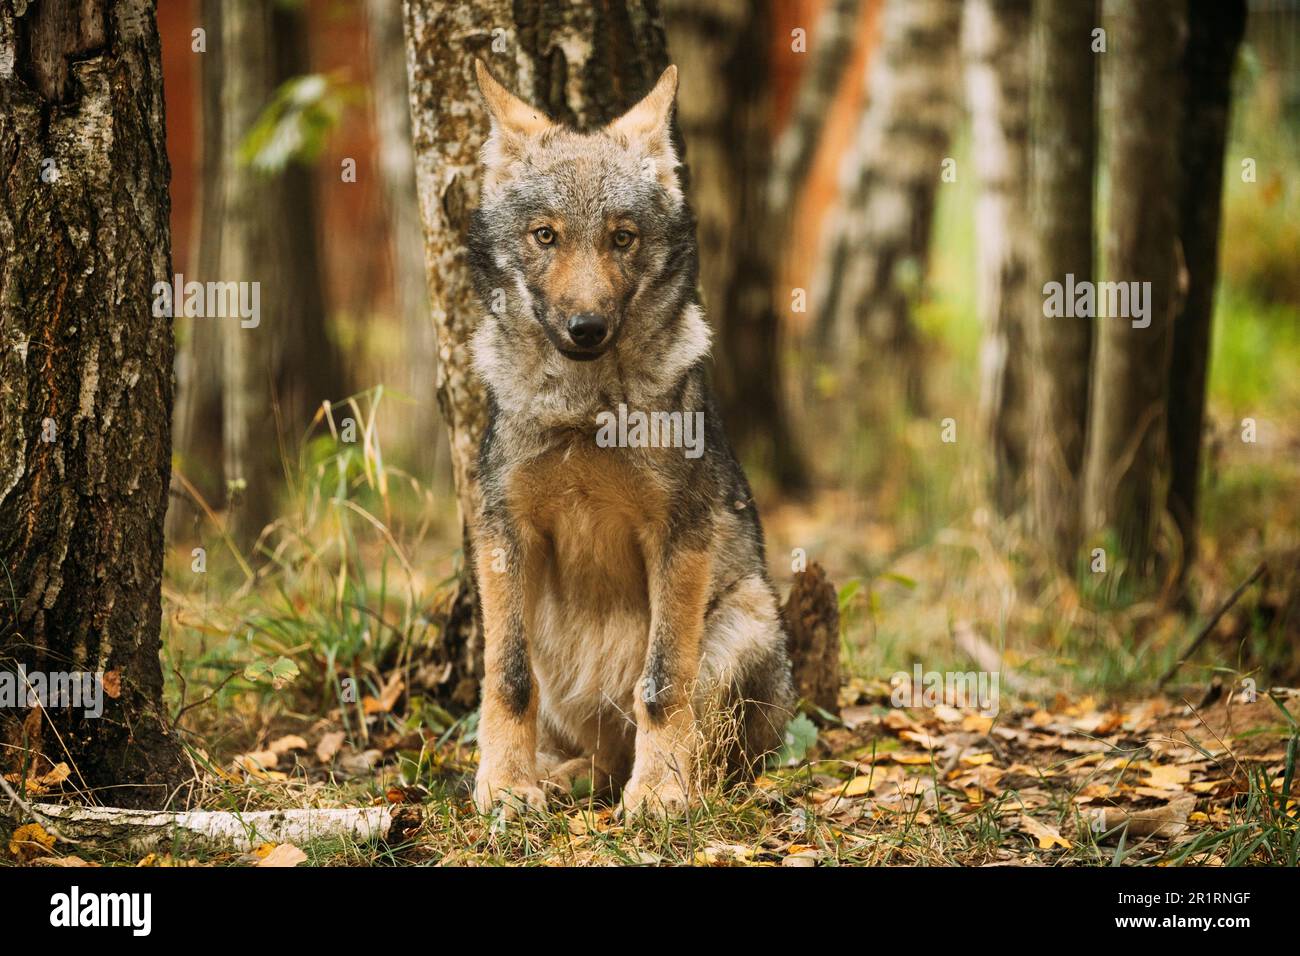 Belarus. Cub Wolf, Canis Lupus, Gray Wolf, Grey Wolf Sitting Outdoors In Autumn Day. Puppy Wolf Portrait. Stock Photo